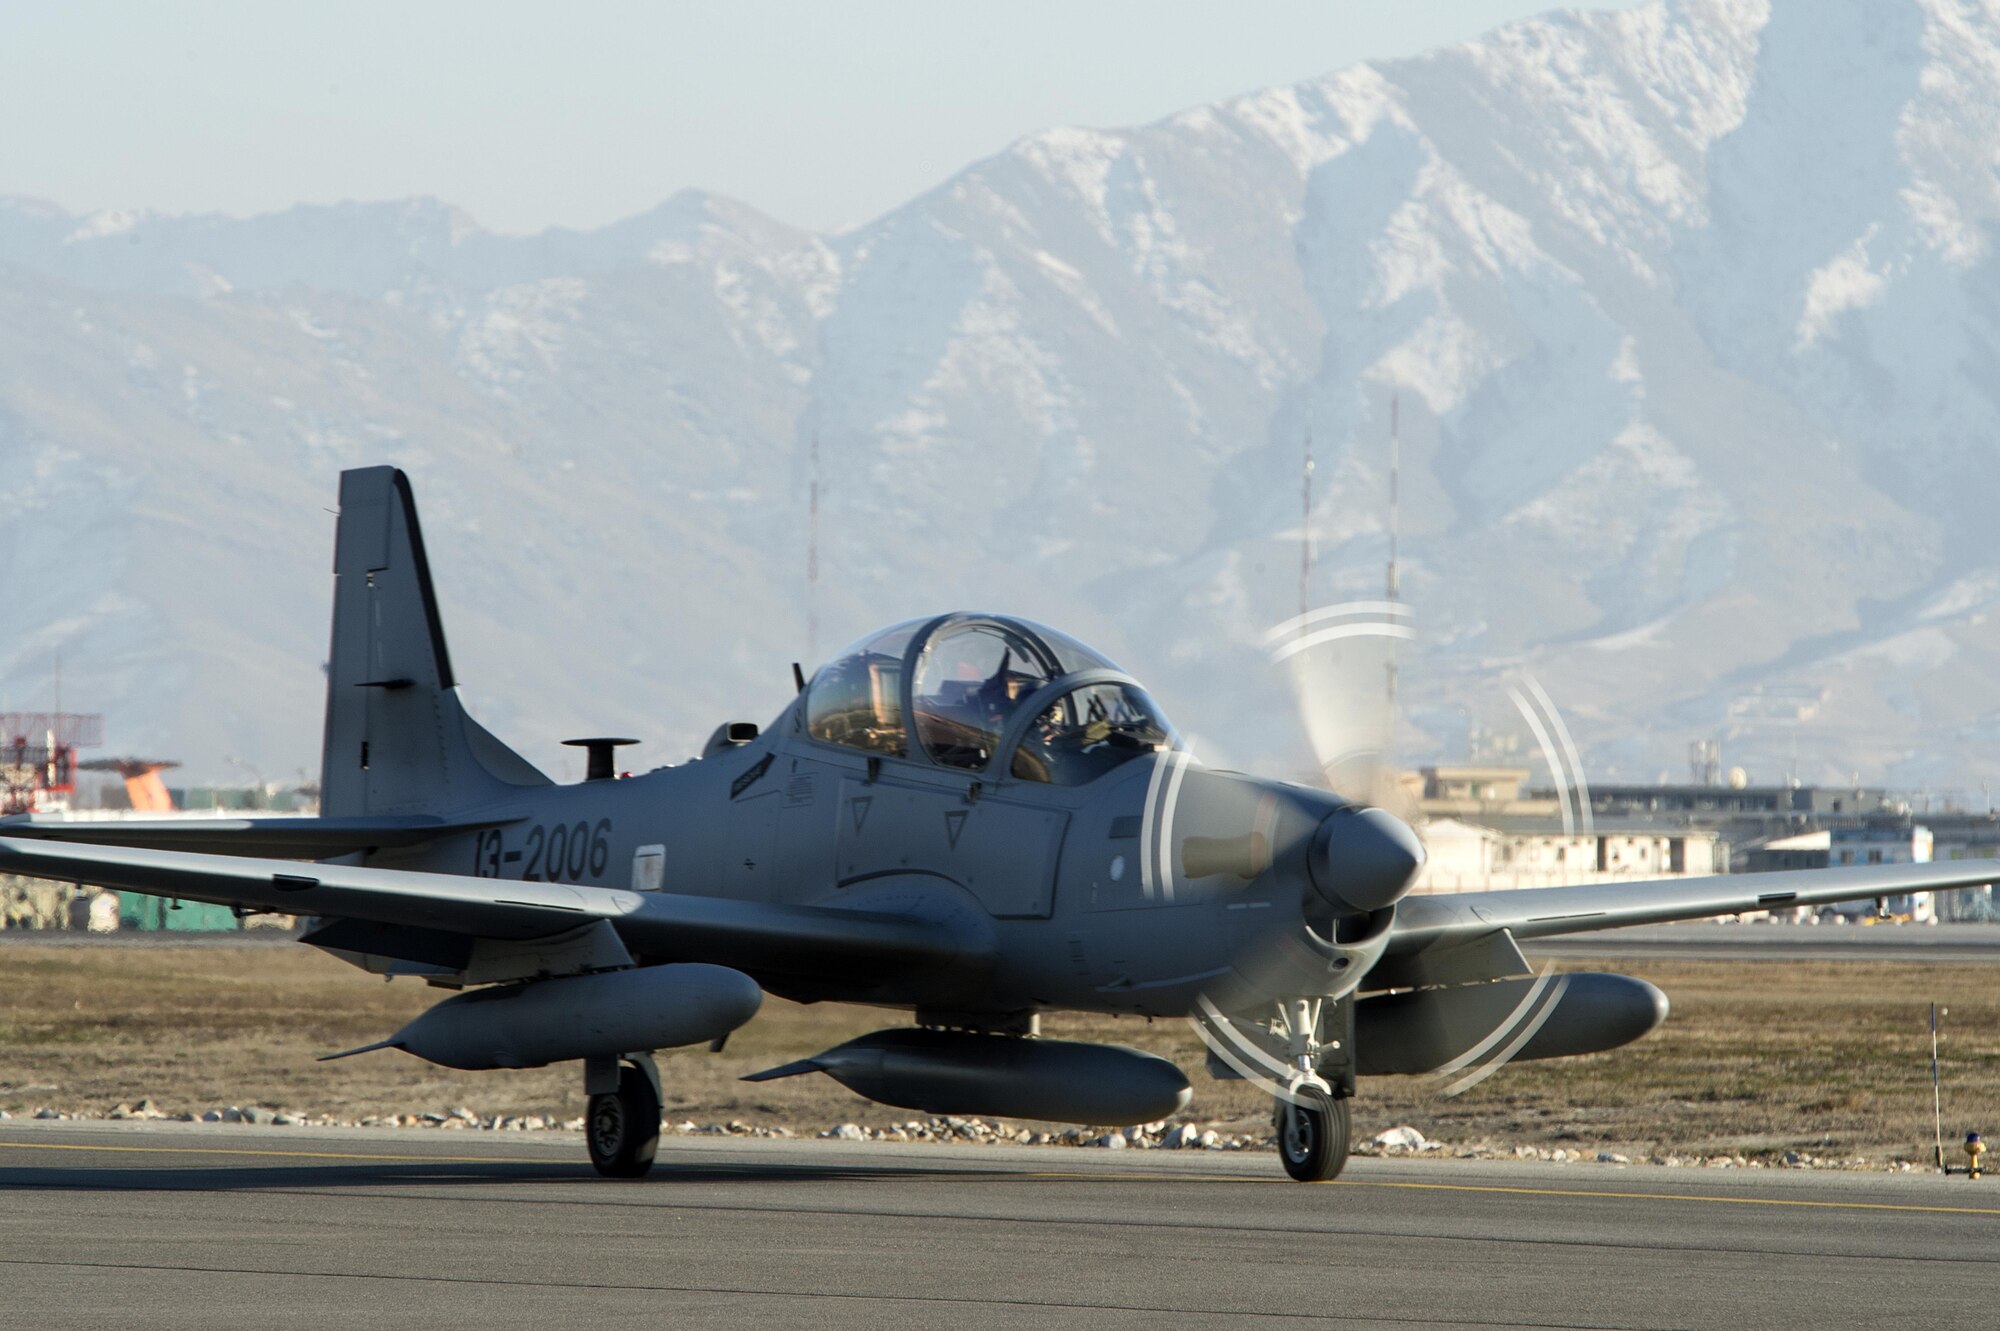 An A-29 Super Tucano taxis across the airfield at Hamid Karzai International Airport, Afghanistan, Jan. 15, 2016. The aircraft will be added to the Afghans' inventory in the spring of 2016. The A-29 Super Tucano is a 'light air support' aircraft capable of conducting close air support, aerial escort, armed overwatch and aerial interdiction. Designed to operate in high temperature and in extremely rugged terrain, the A-29 Super Tucano is highly maneuverable 4th generation weapons system capable of delivering precision guided munitions. It can fly at low speeds and low altitudes, is easy to fly, and provides exceptionally accurate weapons delivery. It is currently in service with 10 different air forces around the world. (U.S. Air Force photo by Tech. Sgt. Nathan Lipscomb)